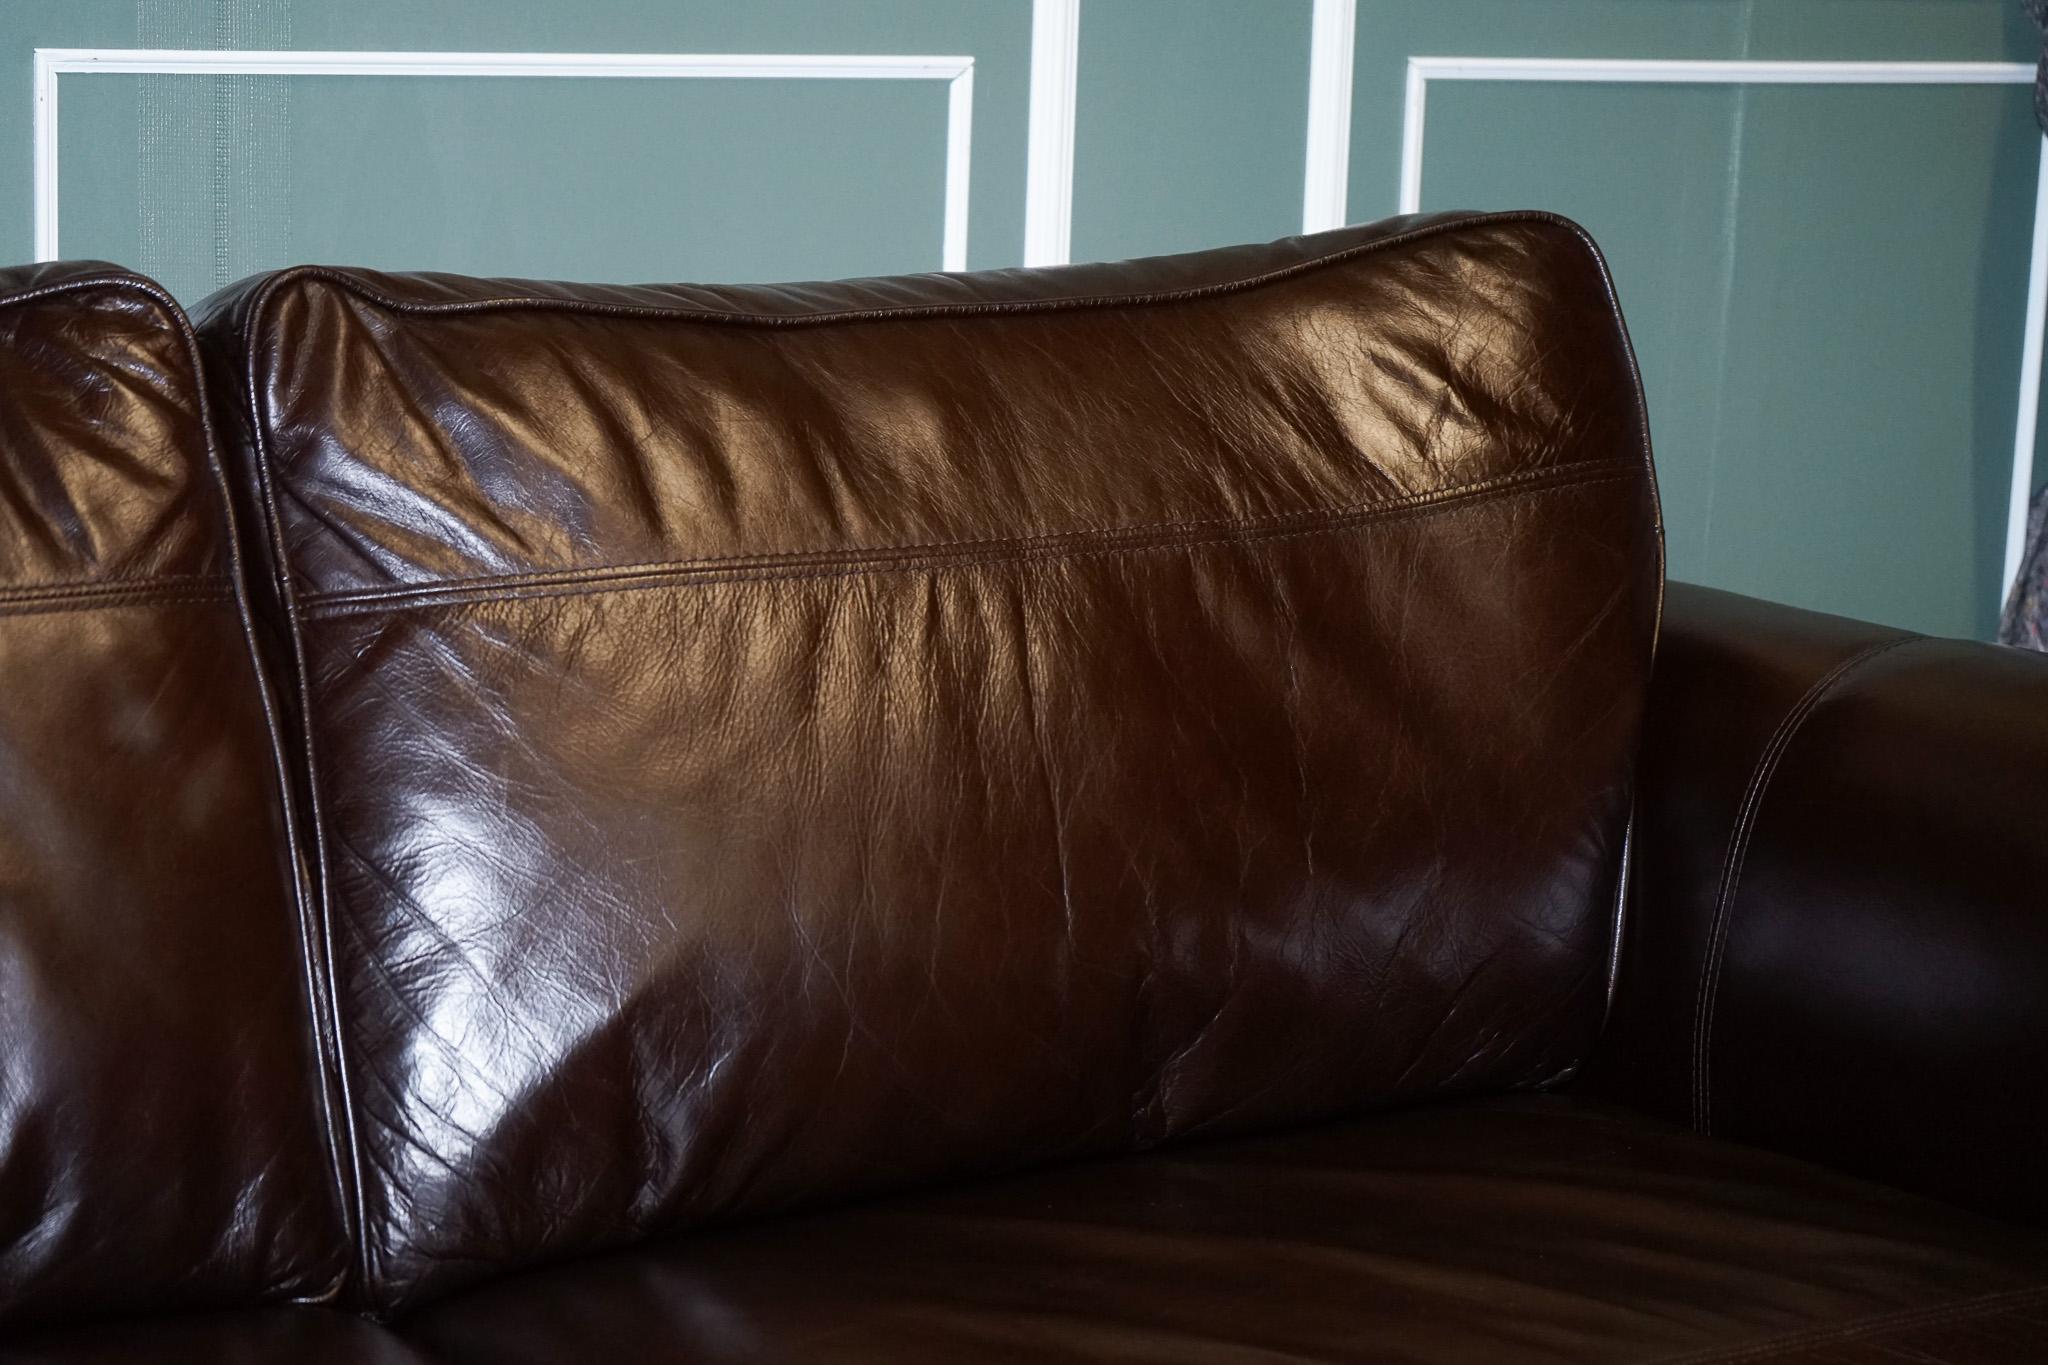 Fait main SOFA VINTAGE STUNNiNG CHOCOLATE BROWN LEATHER 2 TO 3 SEATER en vente